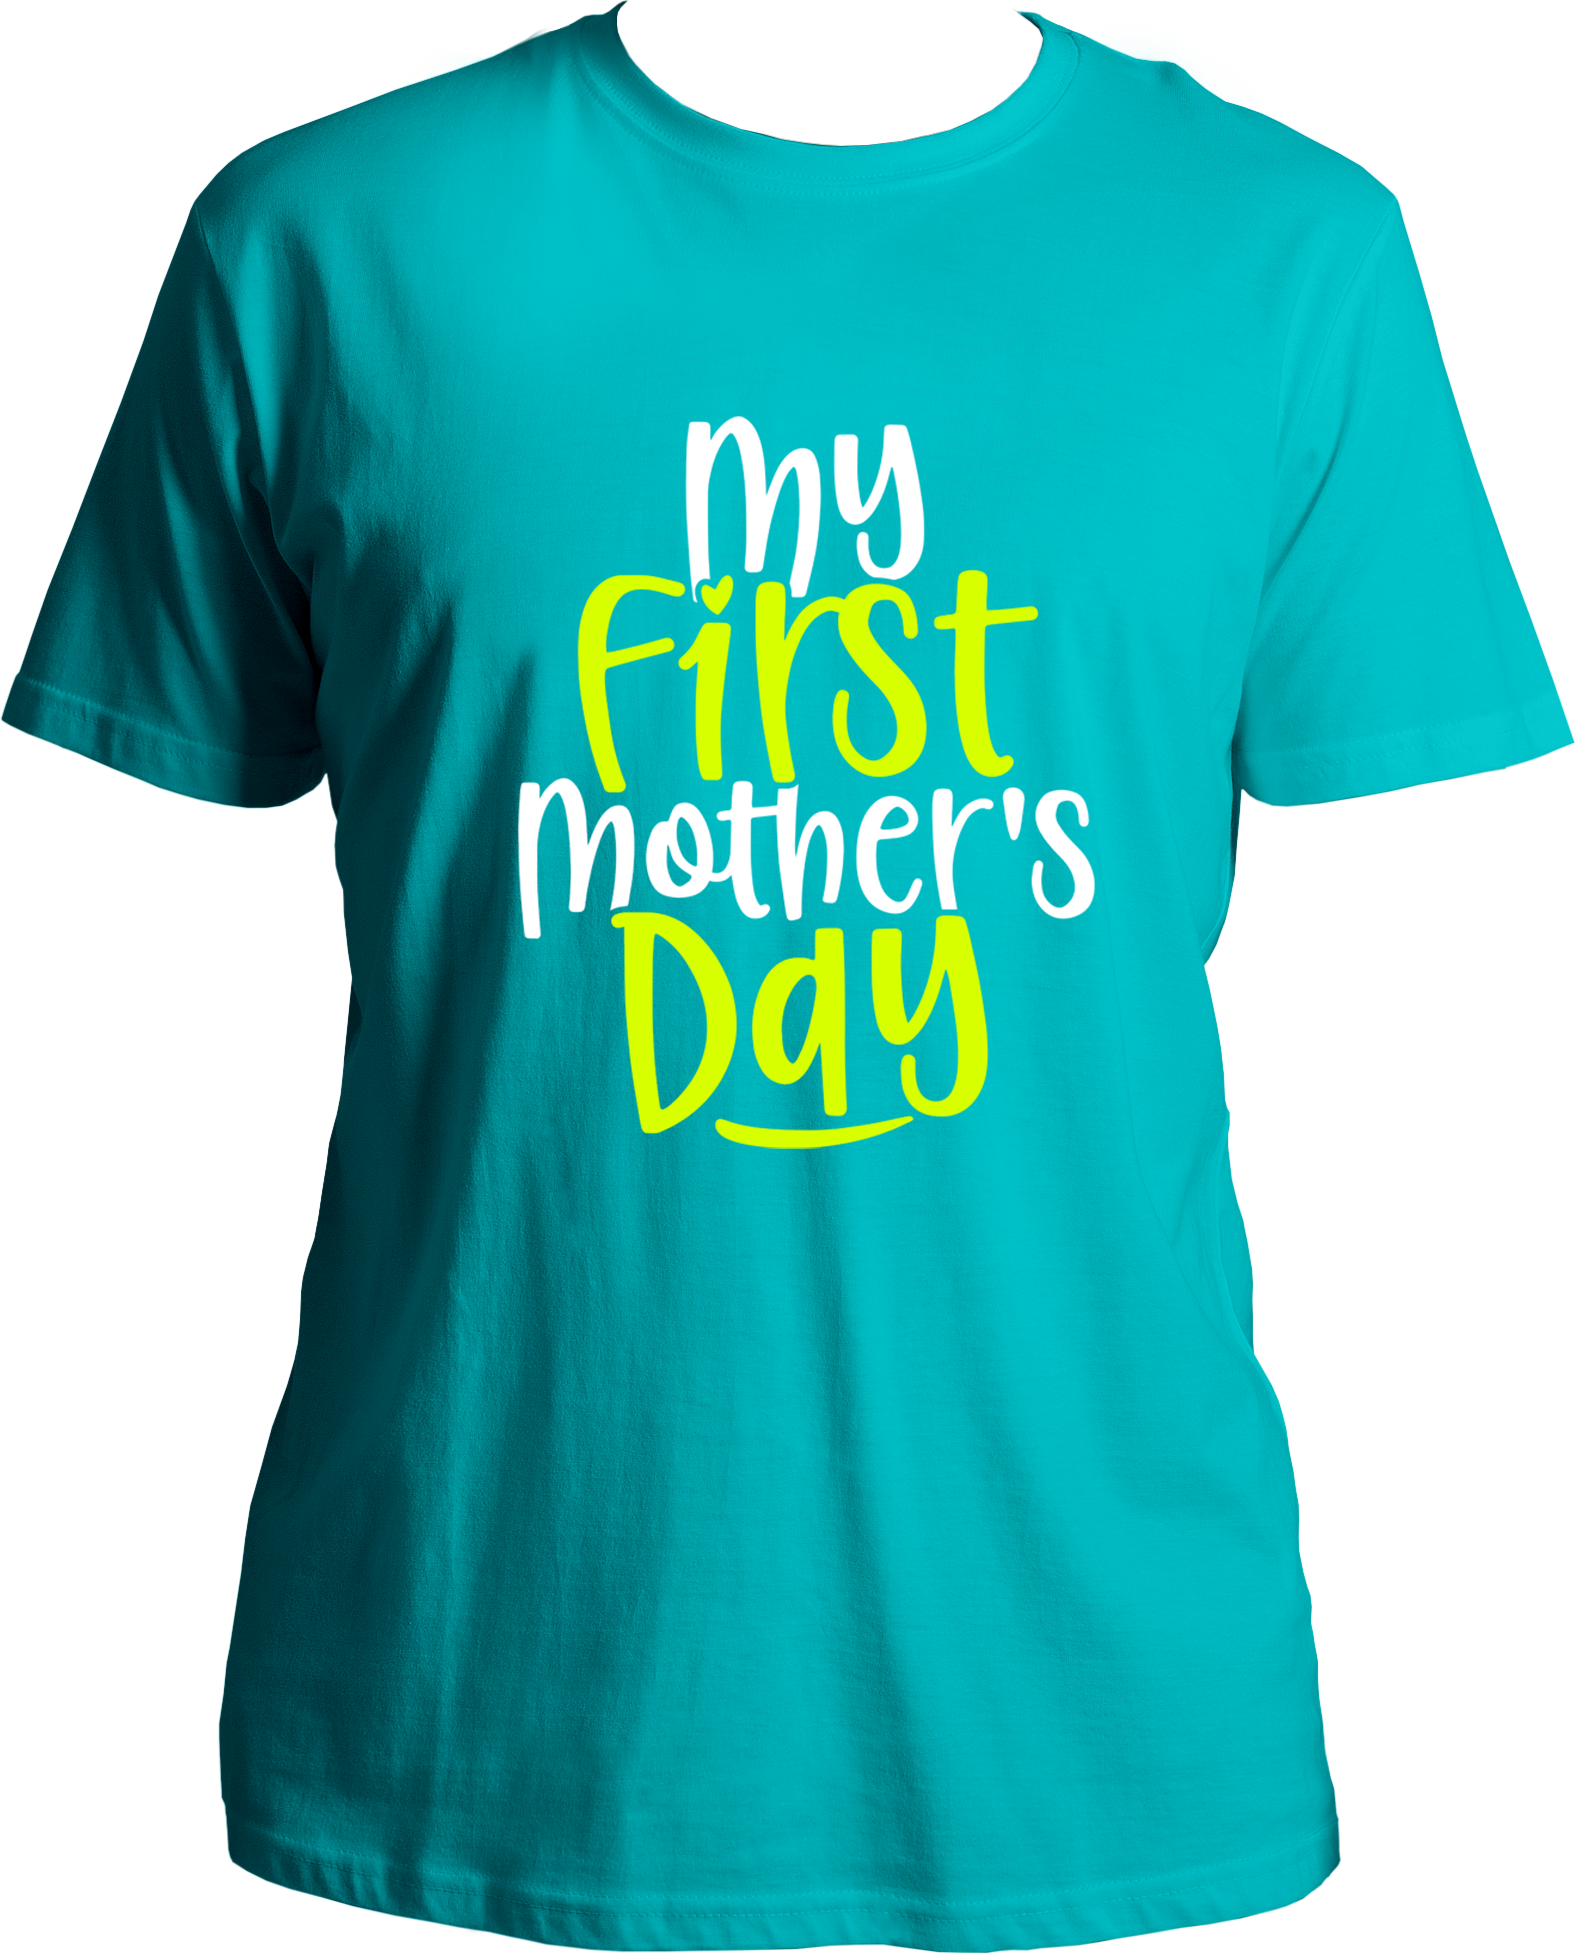 Celebrate your first Mother's Day with a special gift! Make the day special with one of our unique t-shirts, designed specifically for moms celebrating their inaugural Mother's Day. Give a personalized touch and make your first Mother's Day a memorable one. Each t-shirt is crafted with comfort and quality in mind, featuring soft, breathable materials for maximum comfort. These t-shirts are sure to make the perfect statement on the big day.